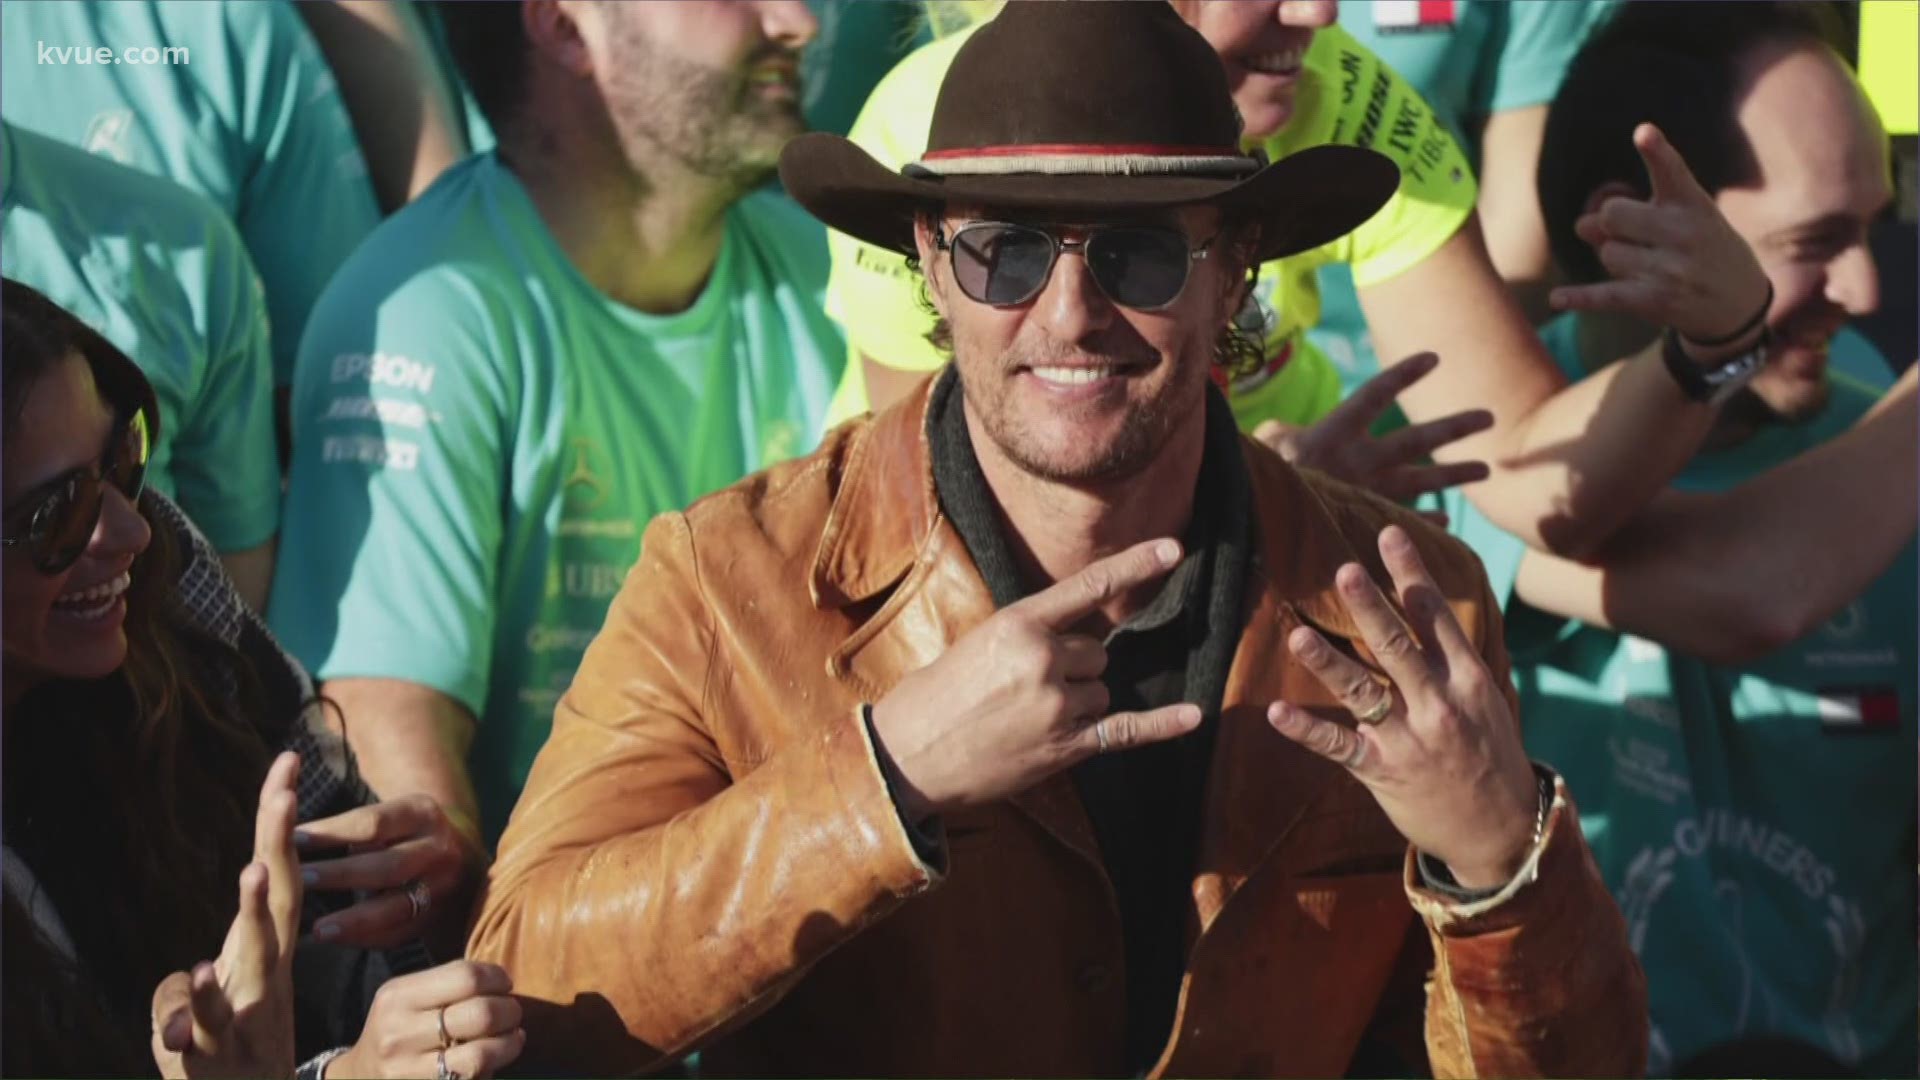 Matthew McConaughey will serve as grand marshal during Sunday's NASCAR race at the Circuit of the Americas.